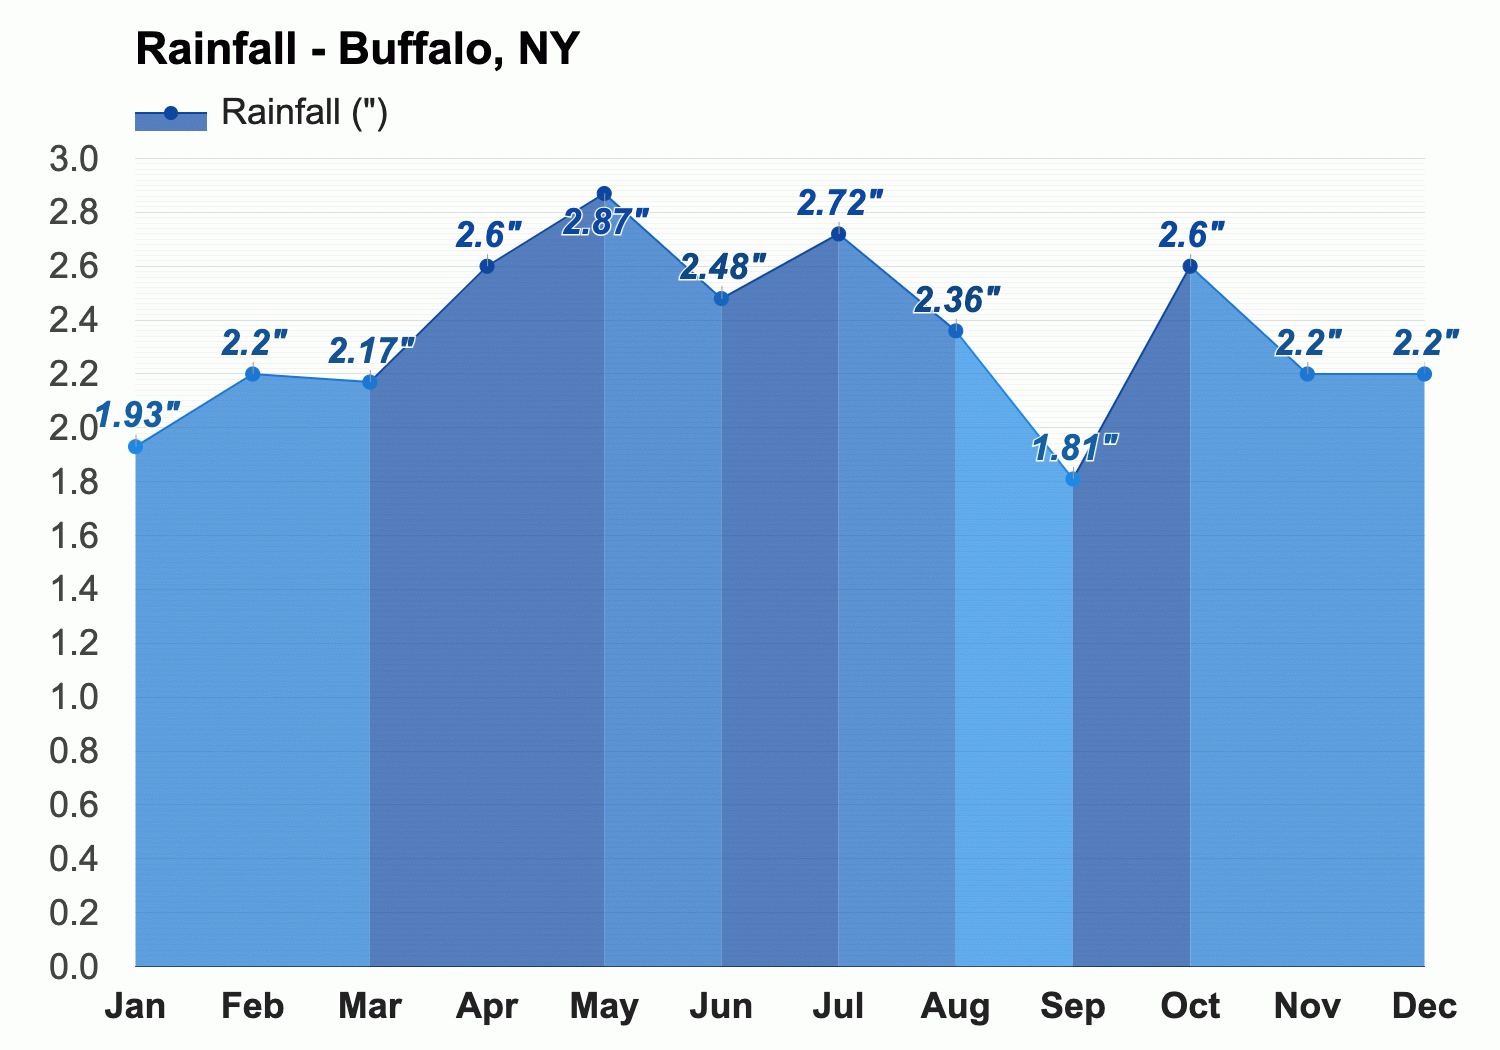 Luscious mulighed husmor Buffalo, NY - Detailed climate information and monthly weather forecast |  Weather Atlas